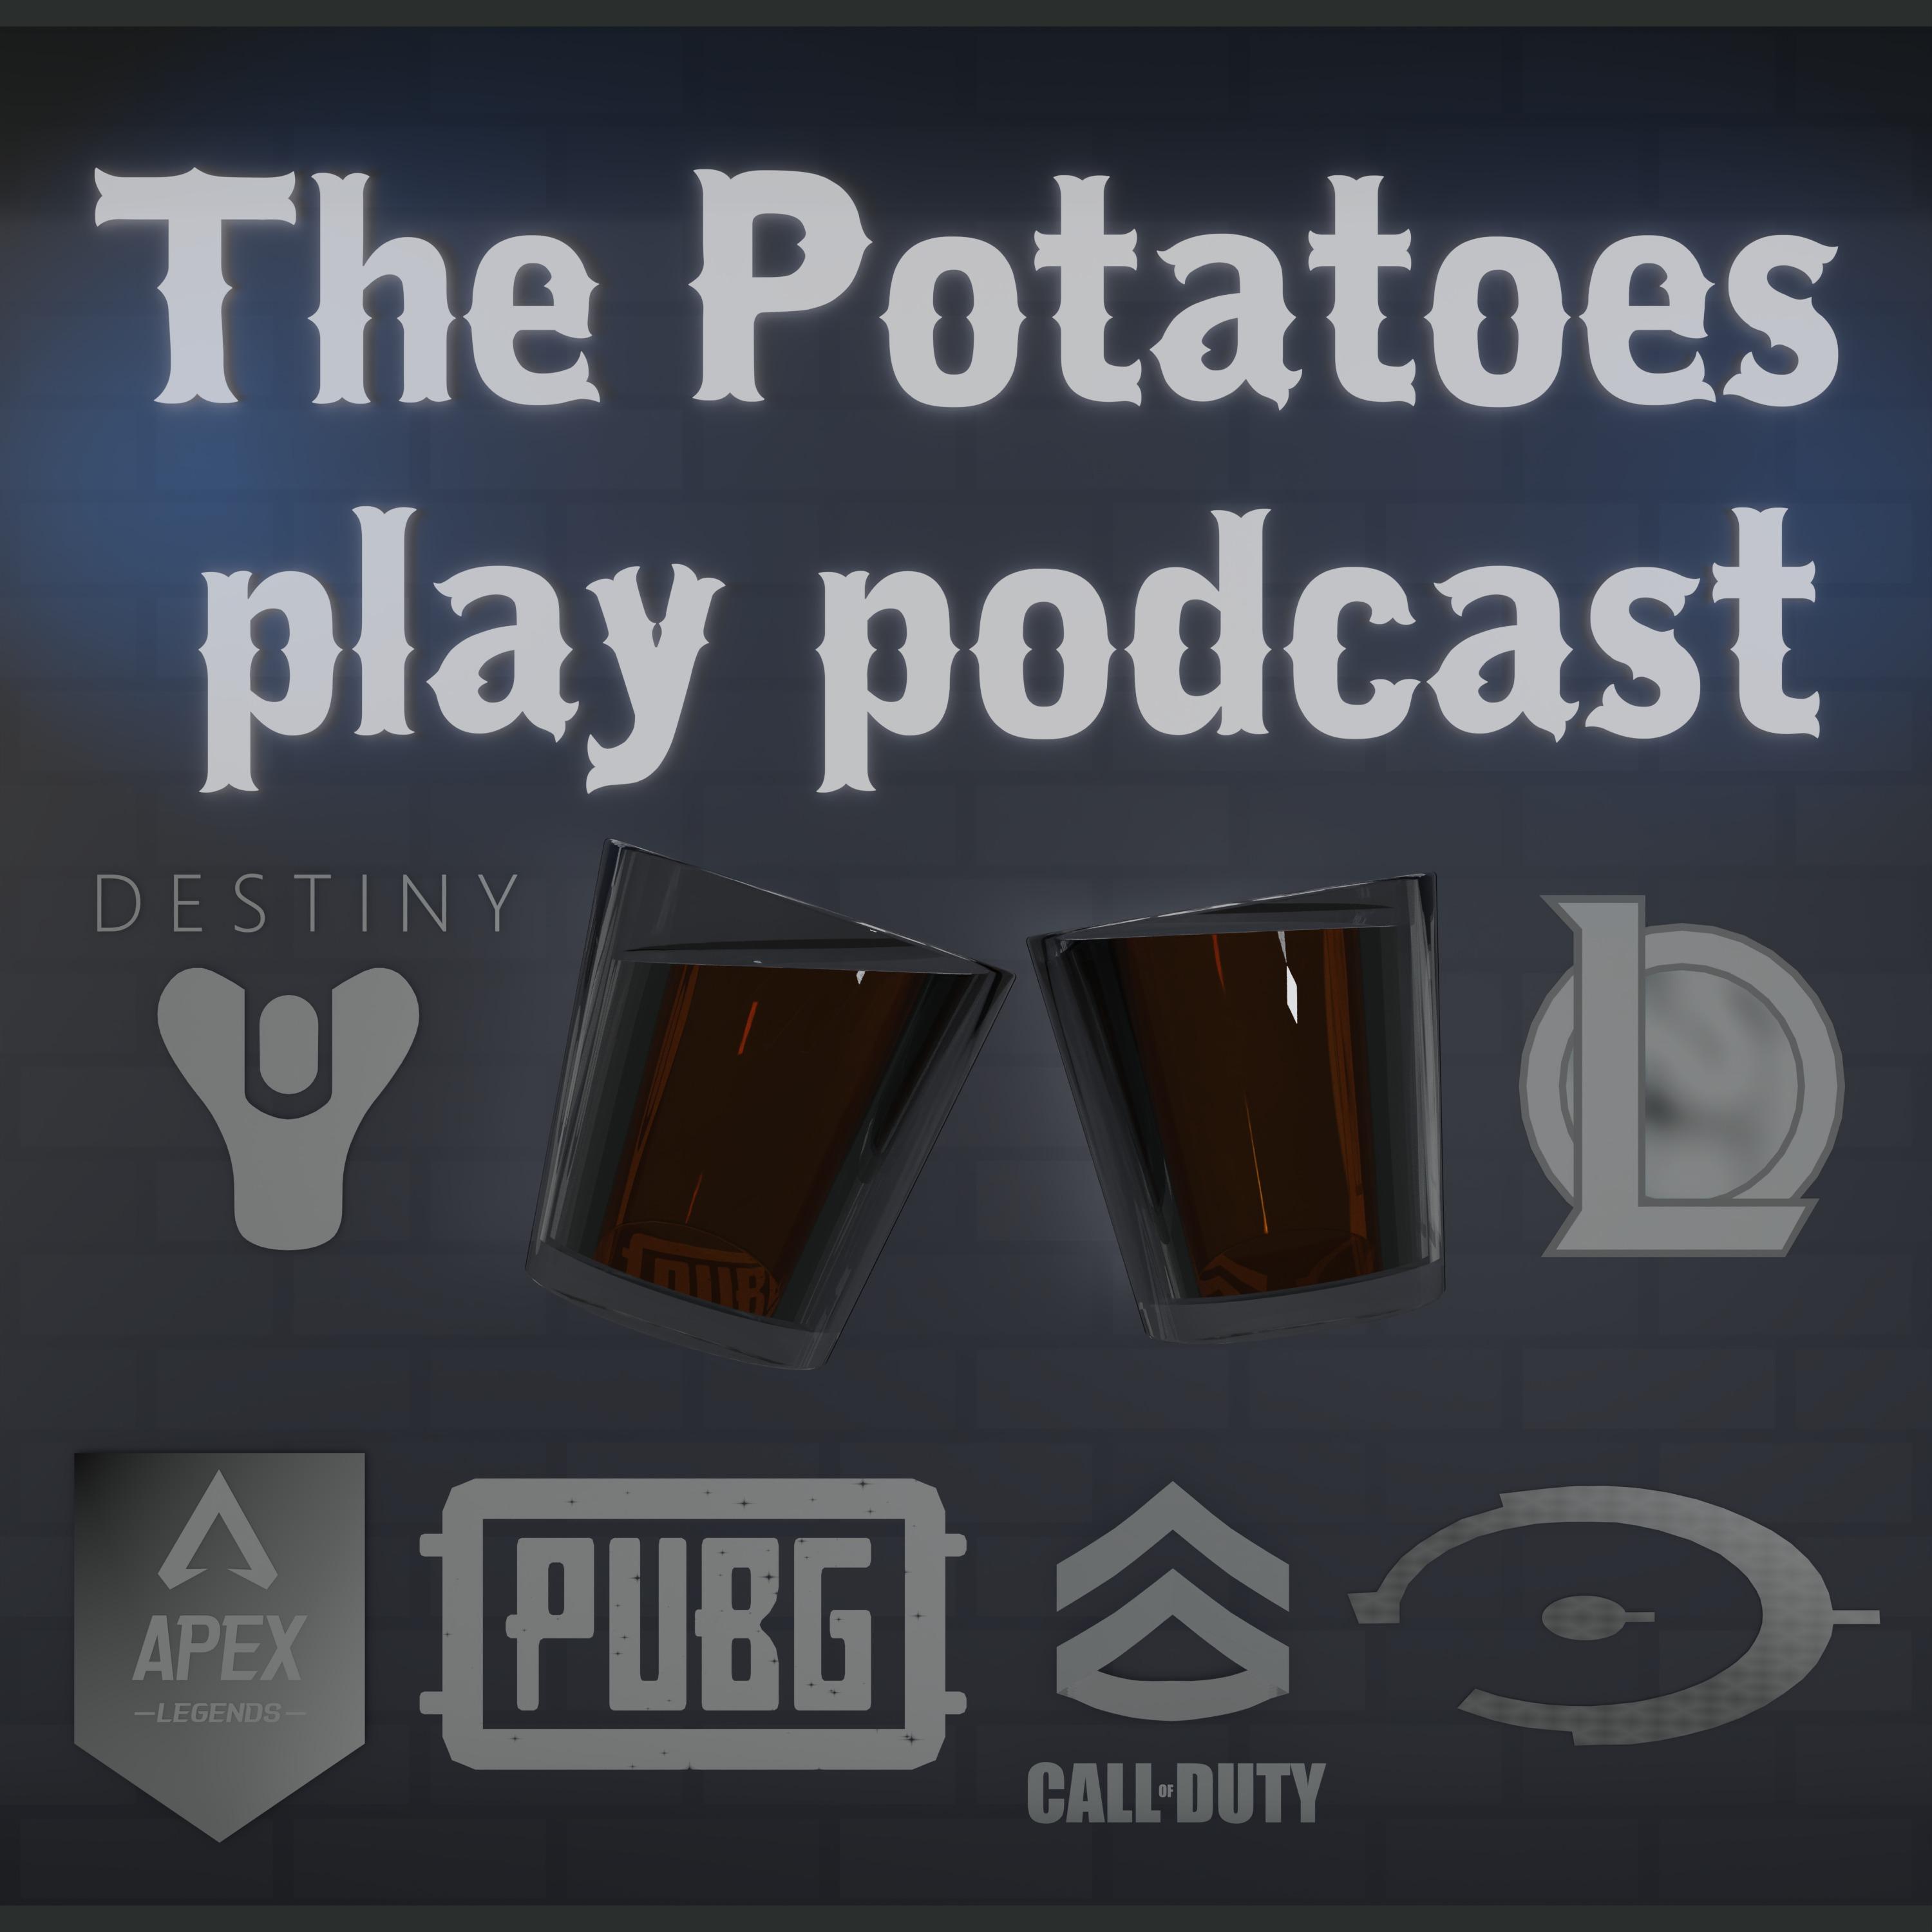 The Potatoes play podcast